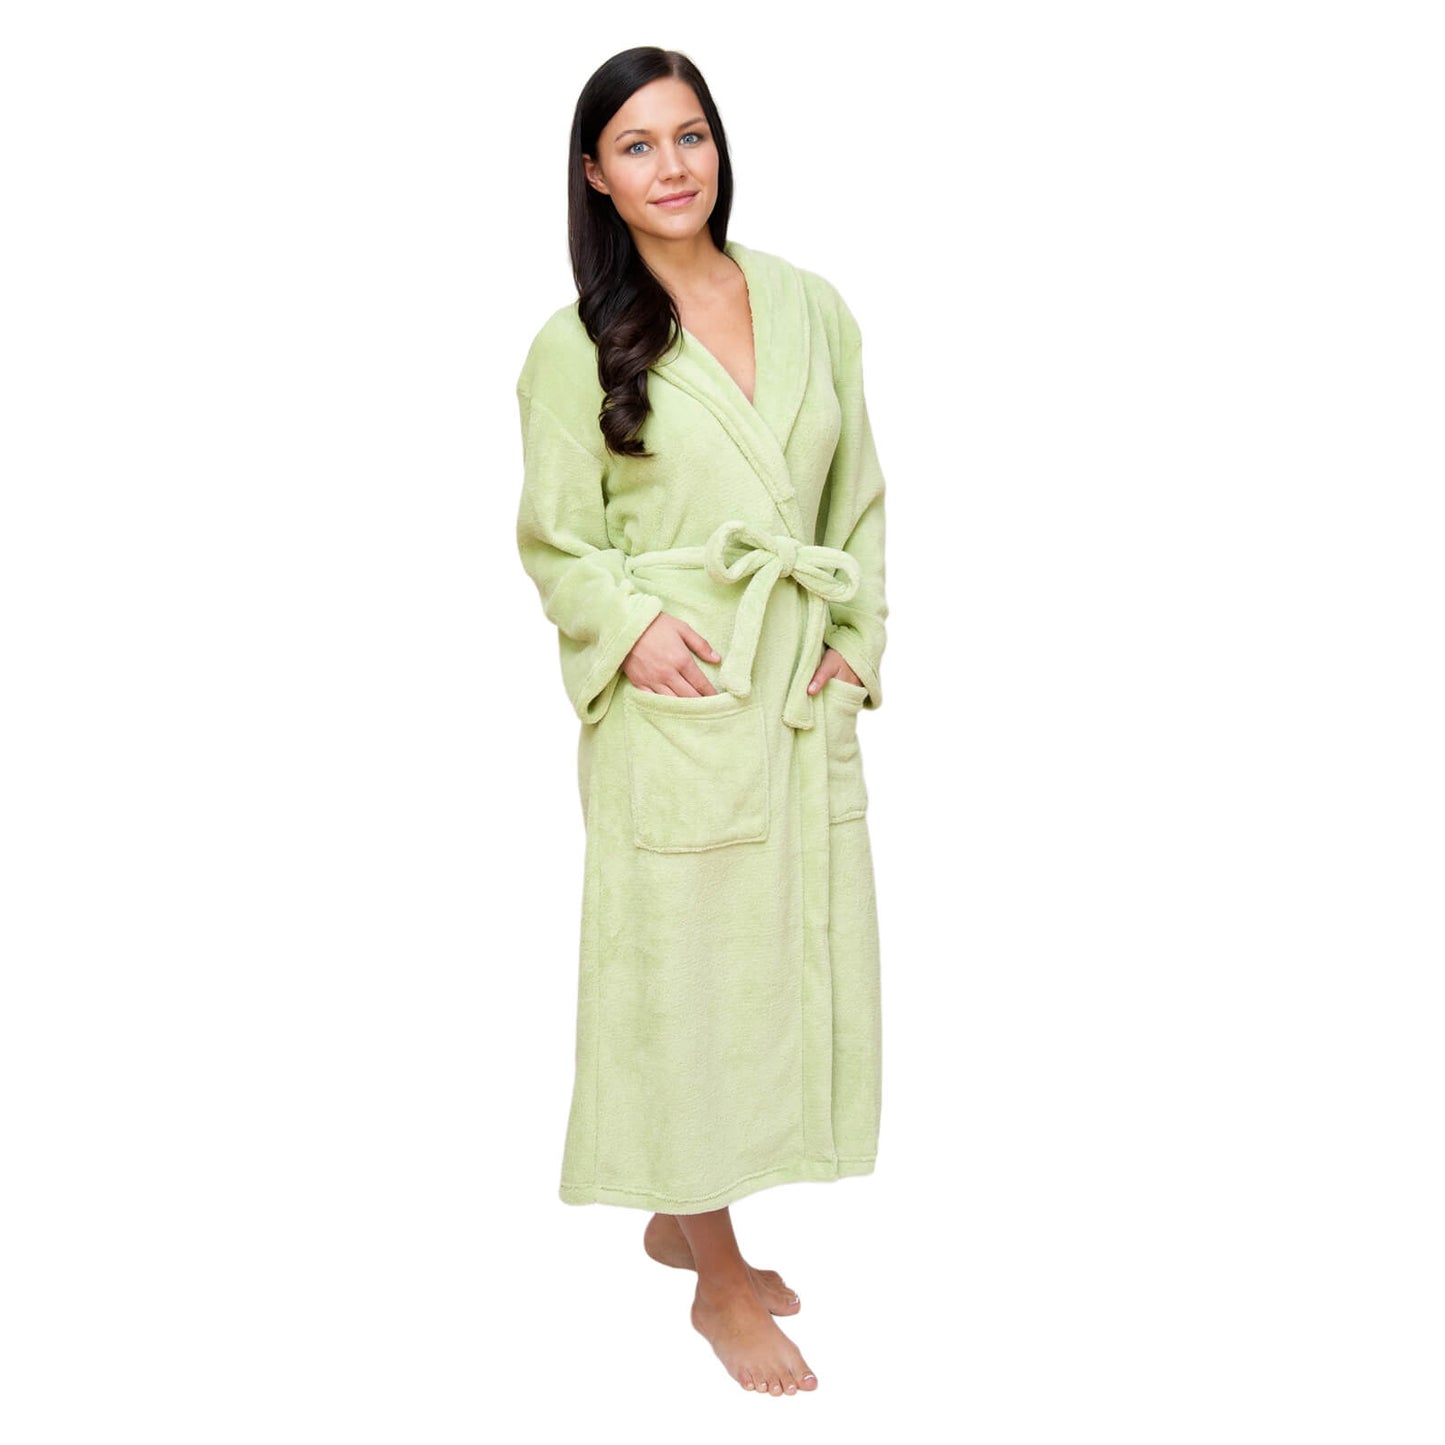 Robes for the Bridal Party